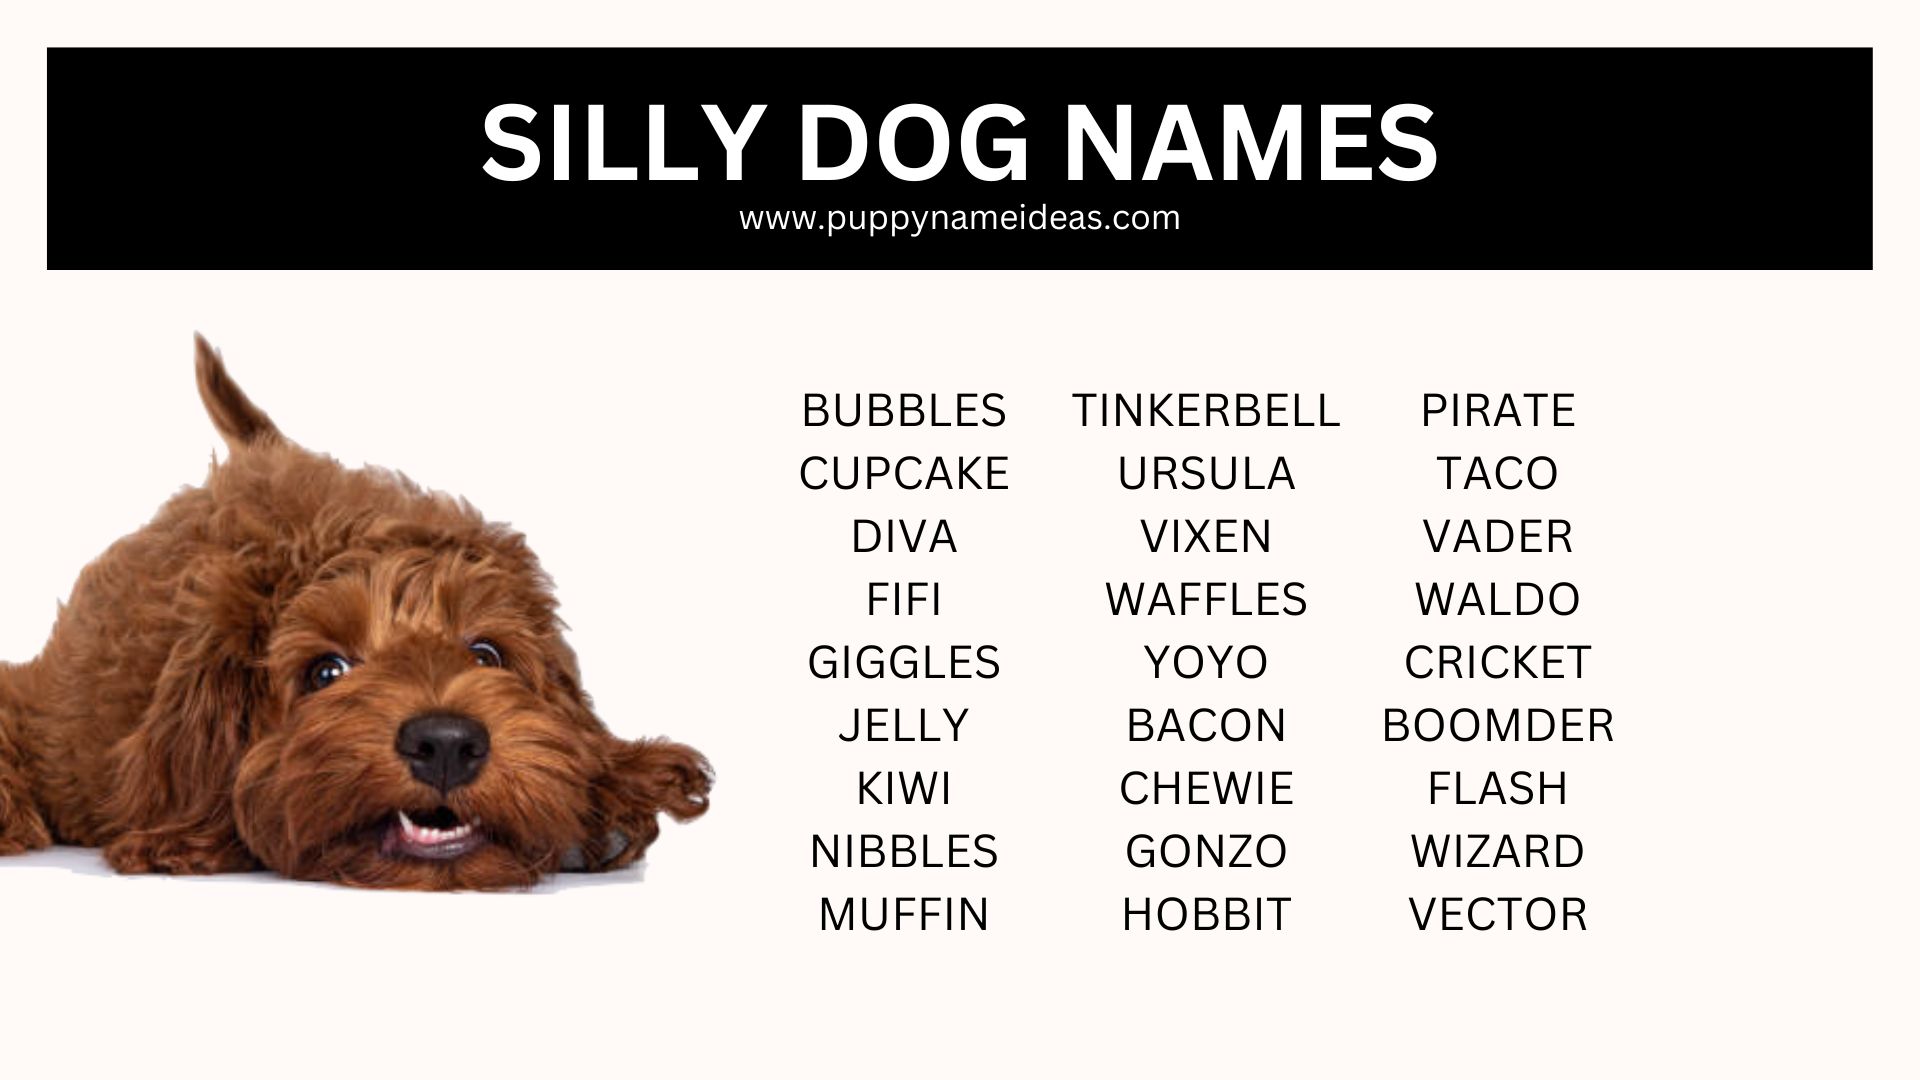 list of silly dog names